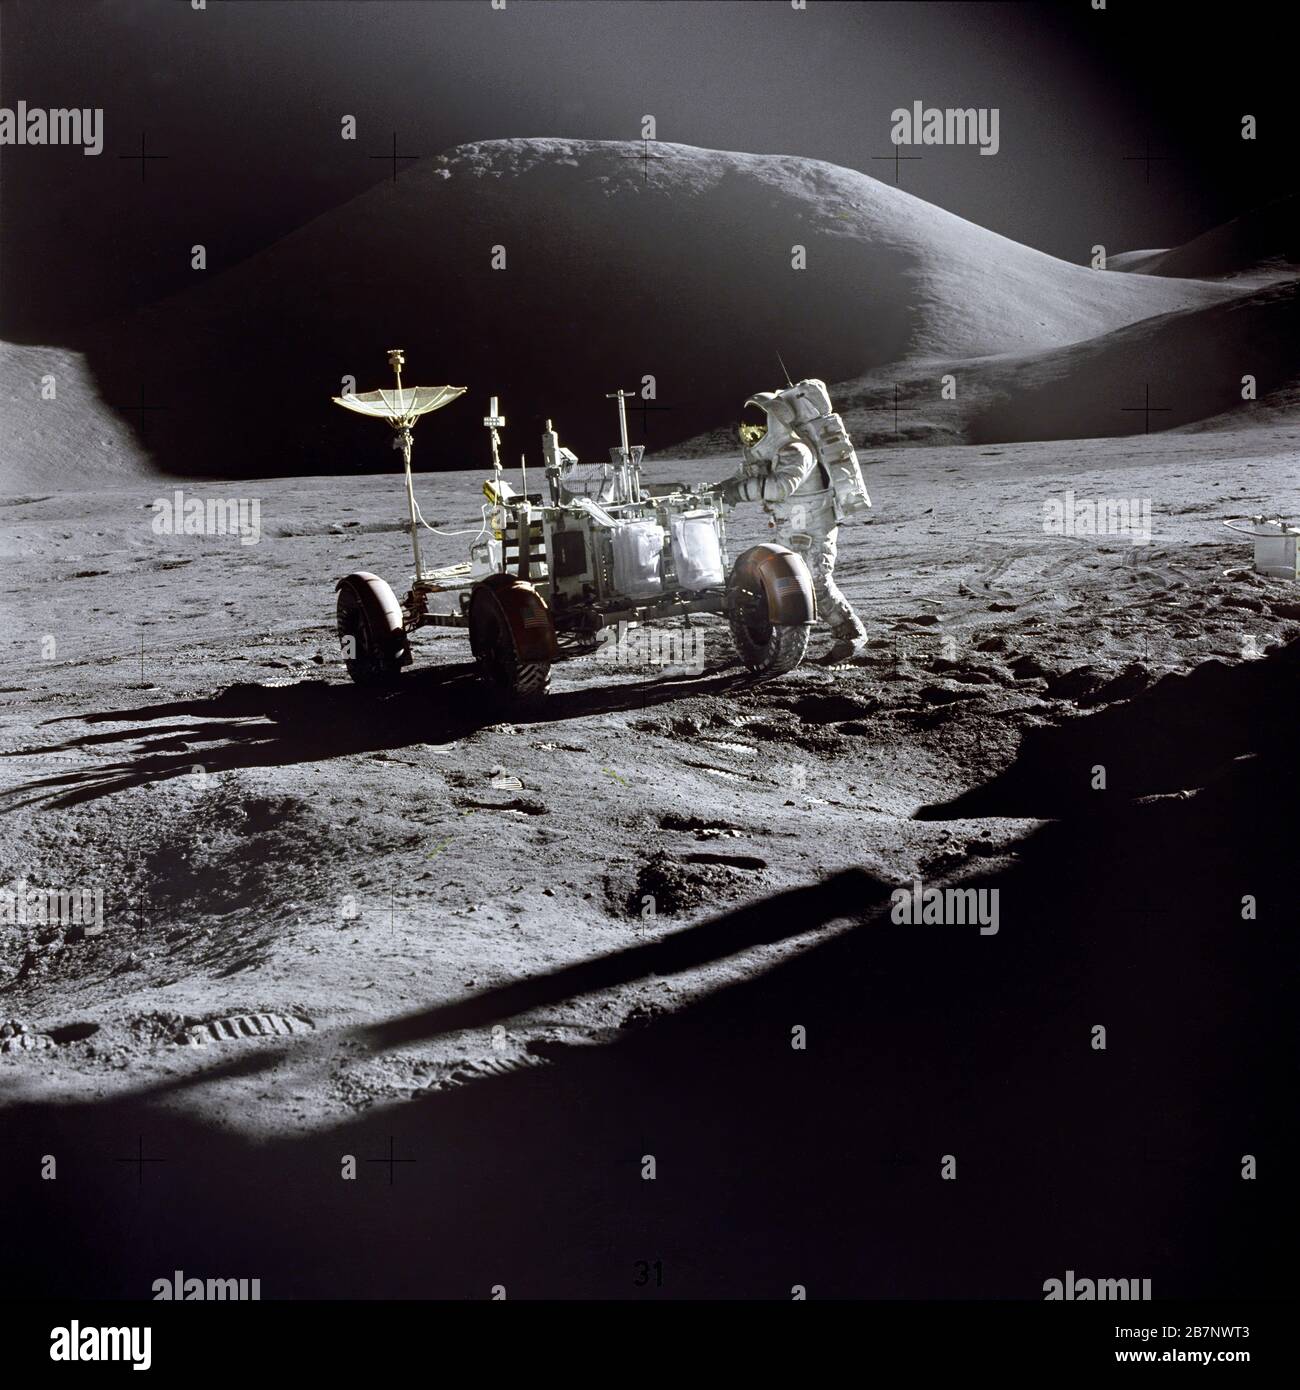 Apollo 15 - NASA, 1971. Lunar module pilot James Irwin works at the Lunar Roving Vehicle during the first Apollo 15 lunar surface extravehicular activity at the Hadley-Apennine landing site. The shadow of the Lunar Module &quot;Falcon&quot; is in the foreground. This view is looking northeast, with Mount Hadley in the background. This photograph was taken by mission commander David Scott, 1917. Stock Photo